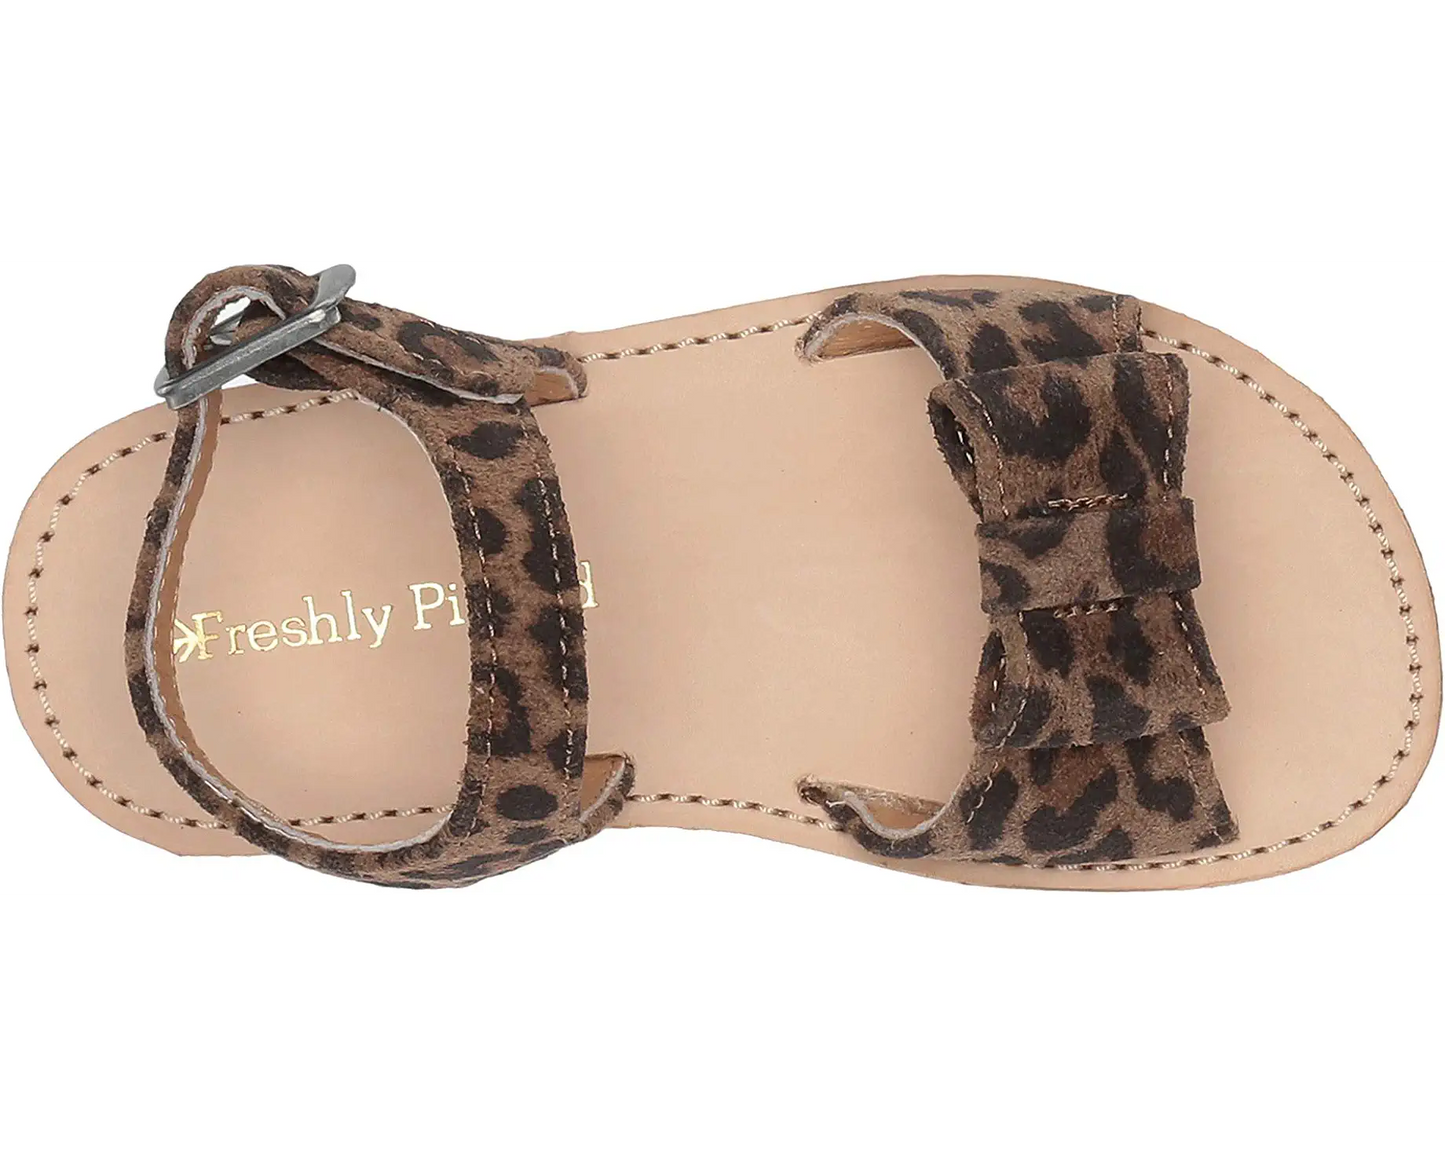 Freshly Picked - Bayview Leopard Sandals